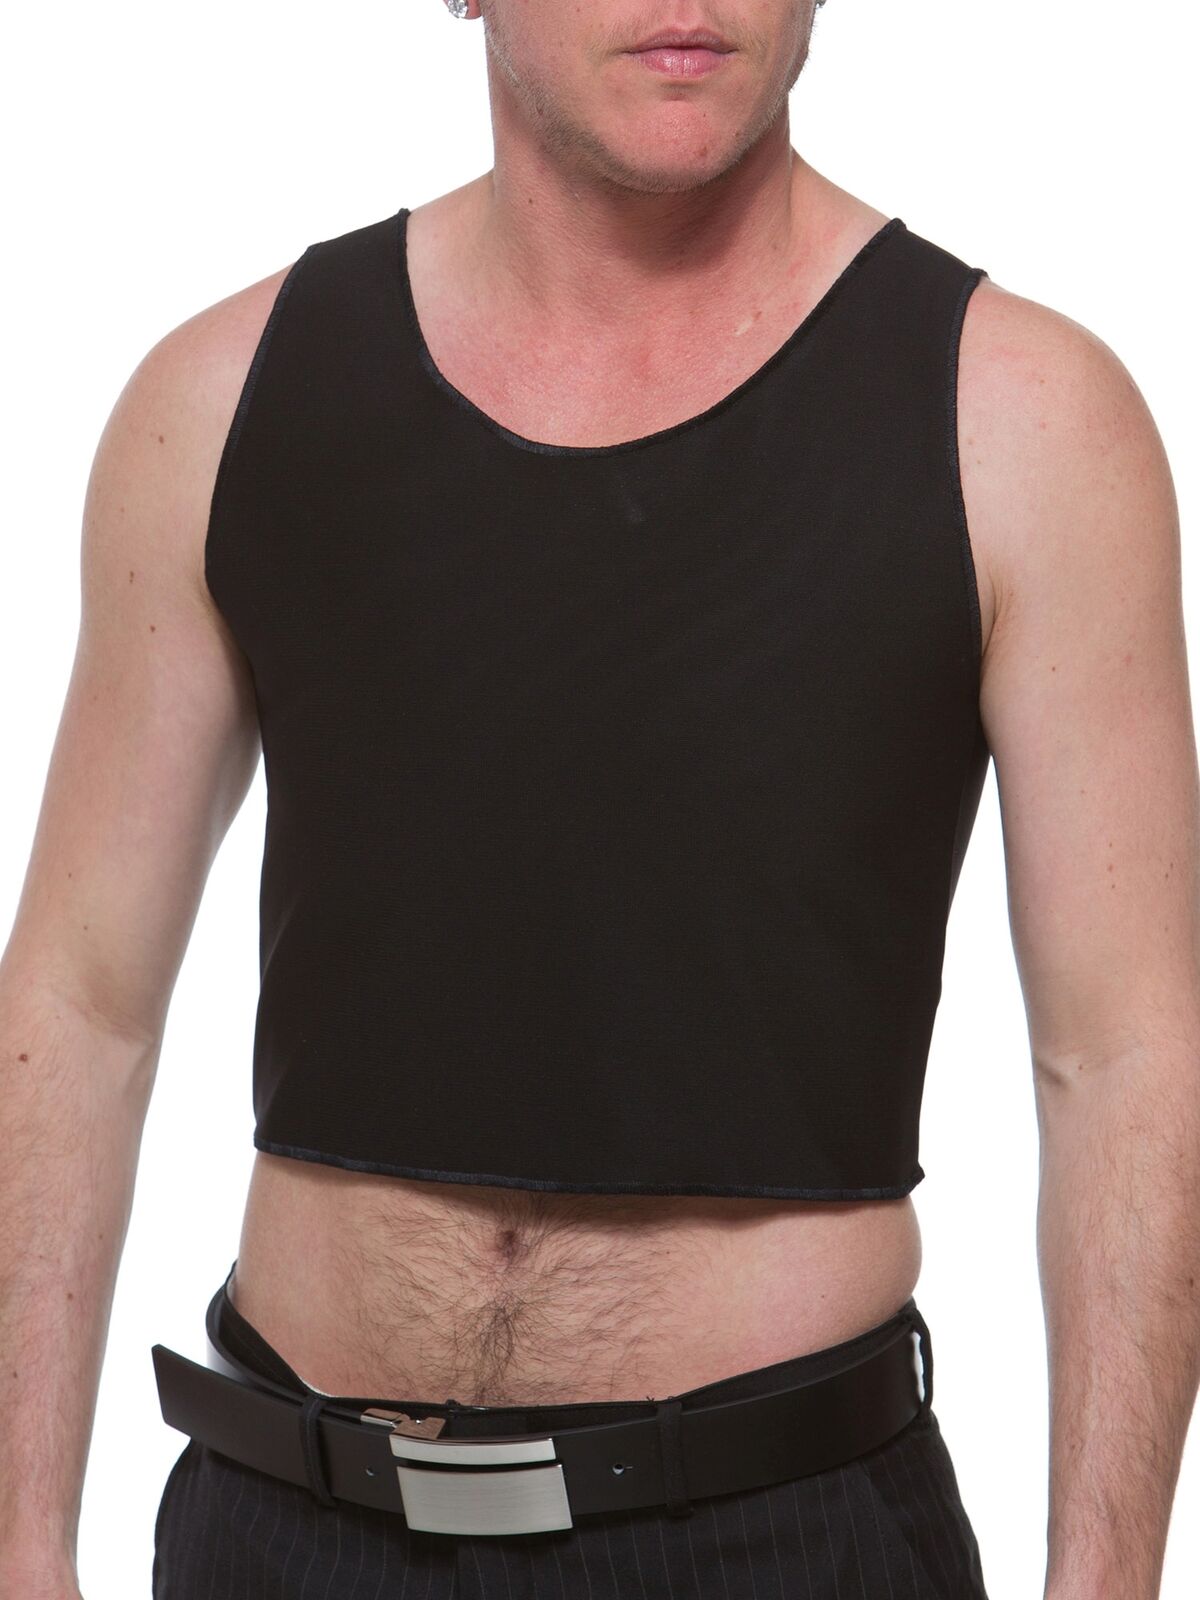 File:Transmasculine person wearing a binder, seen from the side 2.jpg -  Wikimedia Commons